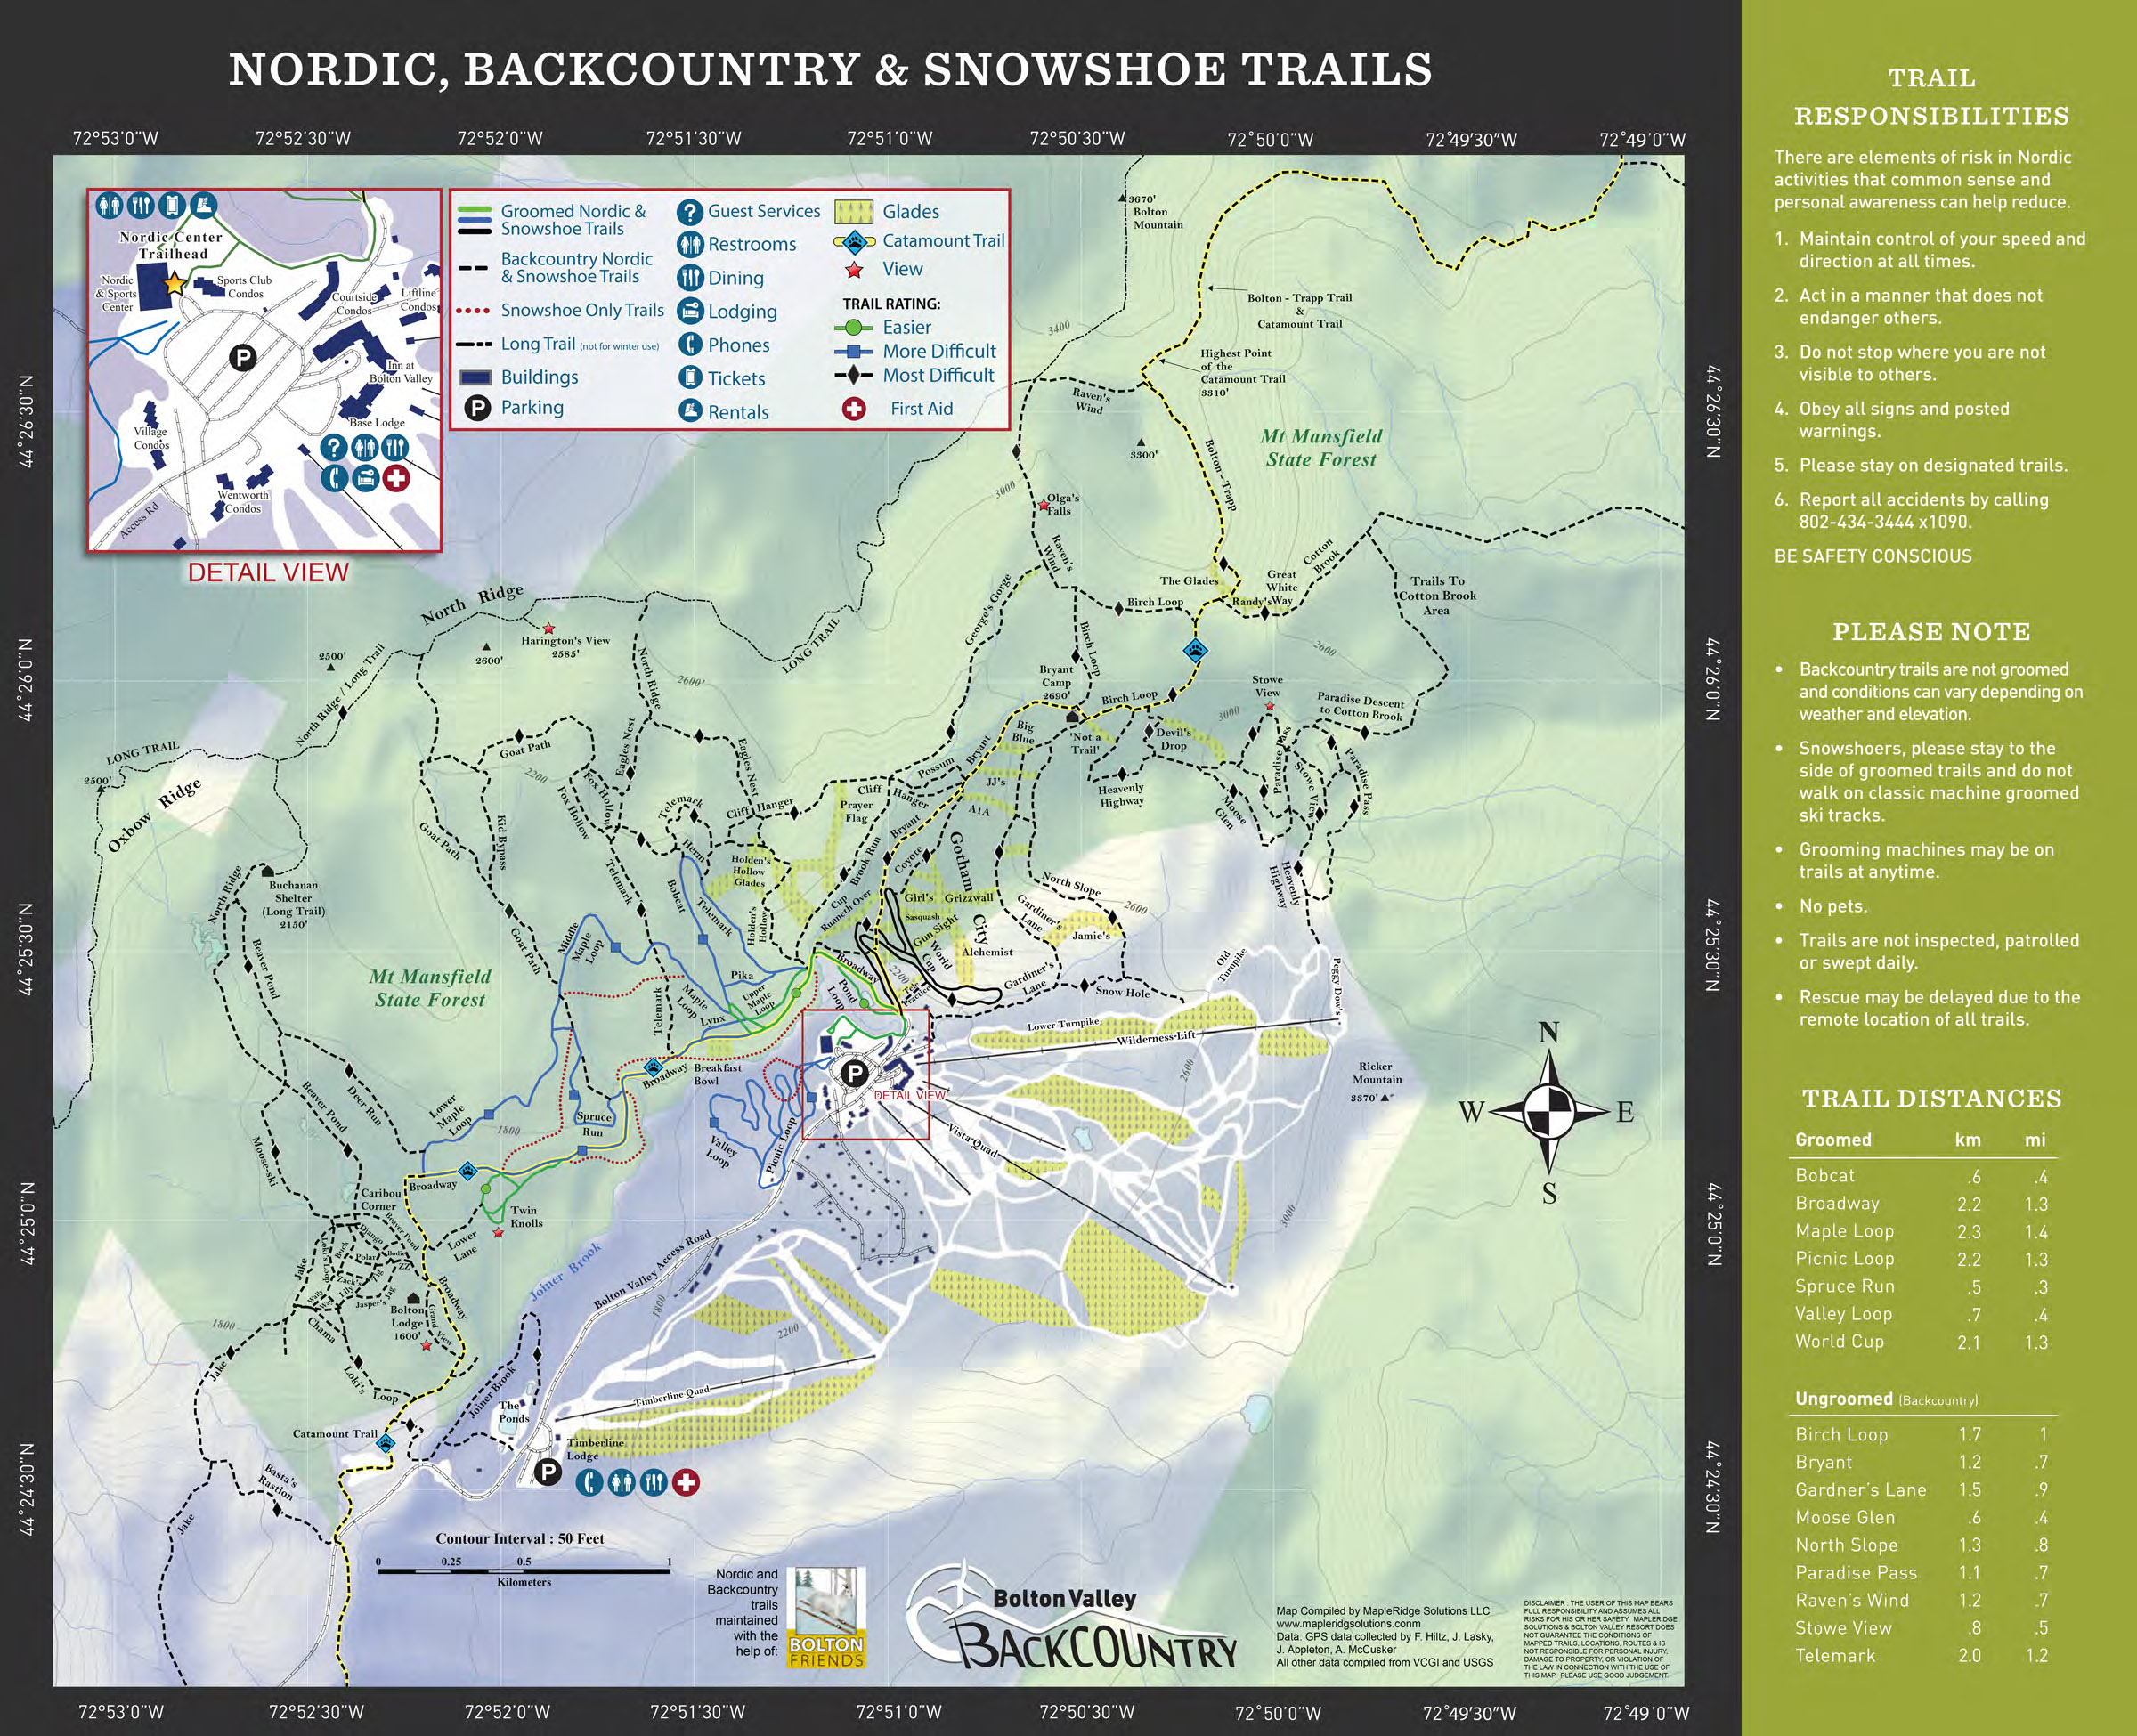 This season's update of Bolton Valley's Nordic & Backcountry trail map is once again listing a lot of the glades.